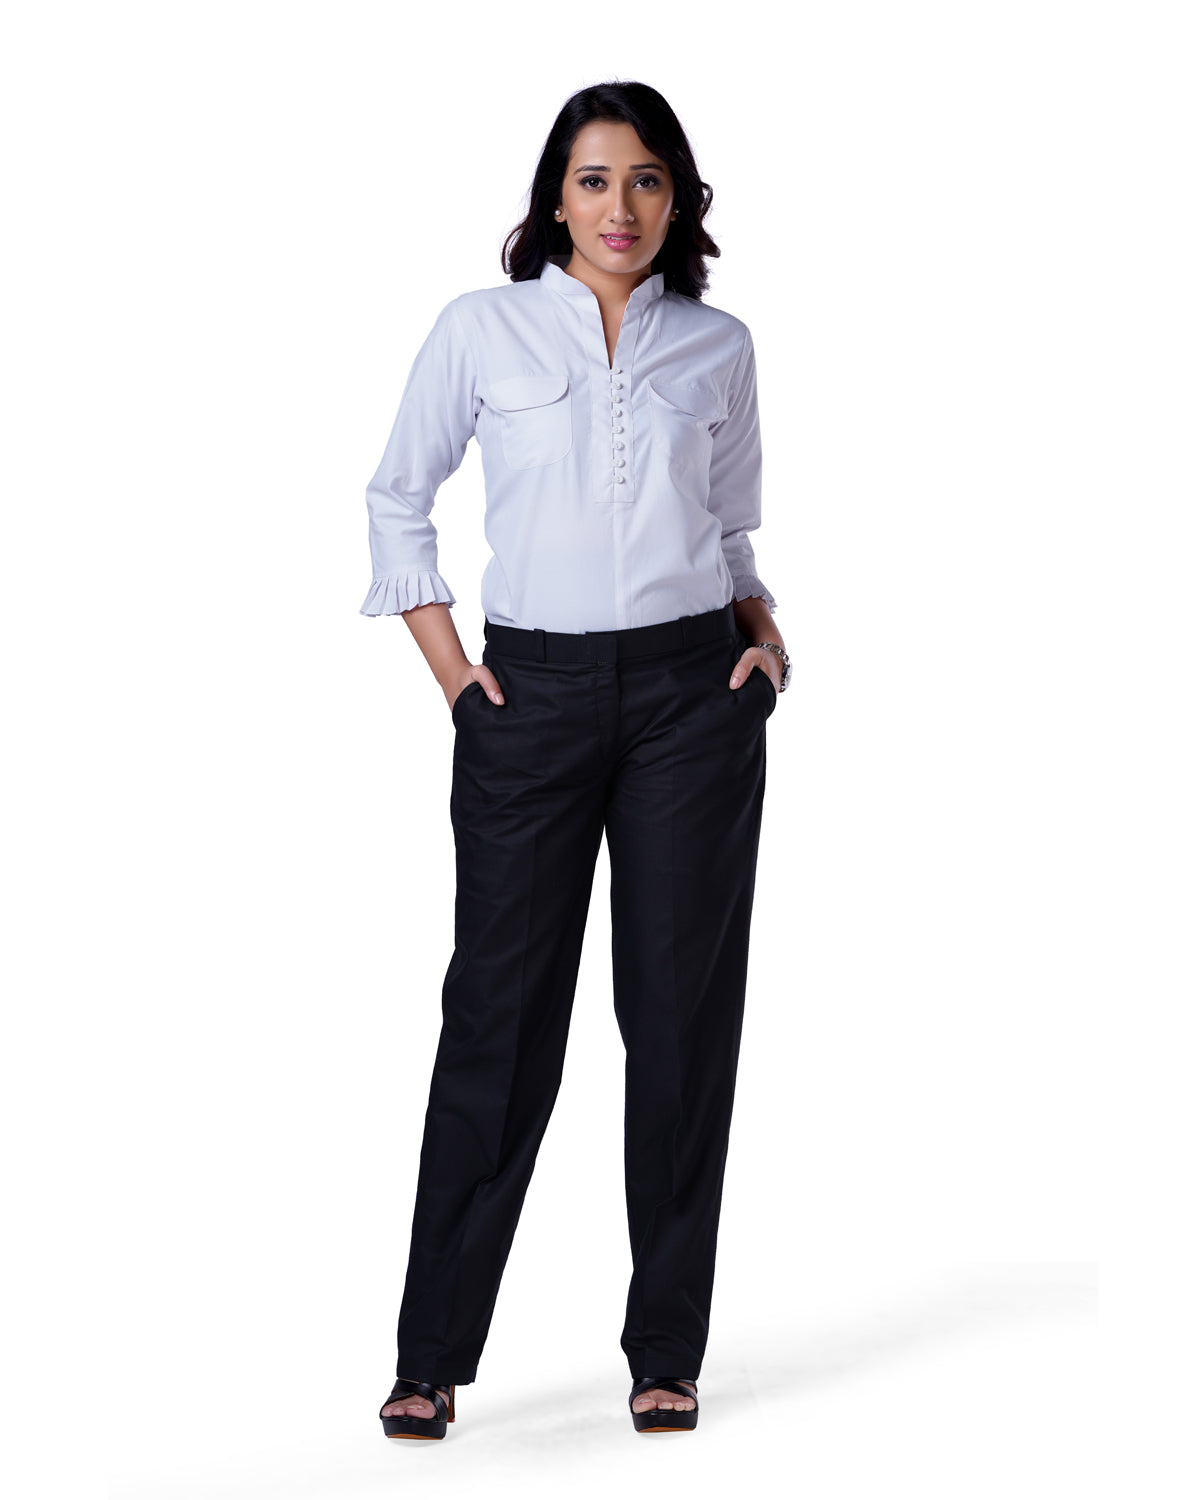 How to choose the best office trousers? | D2Line